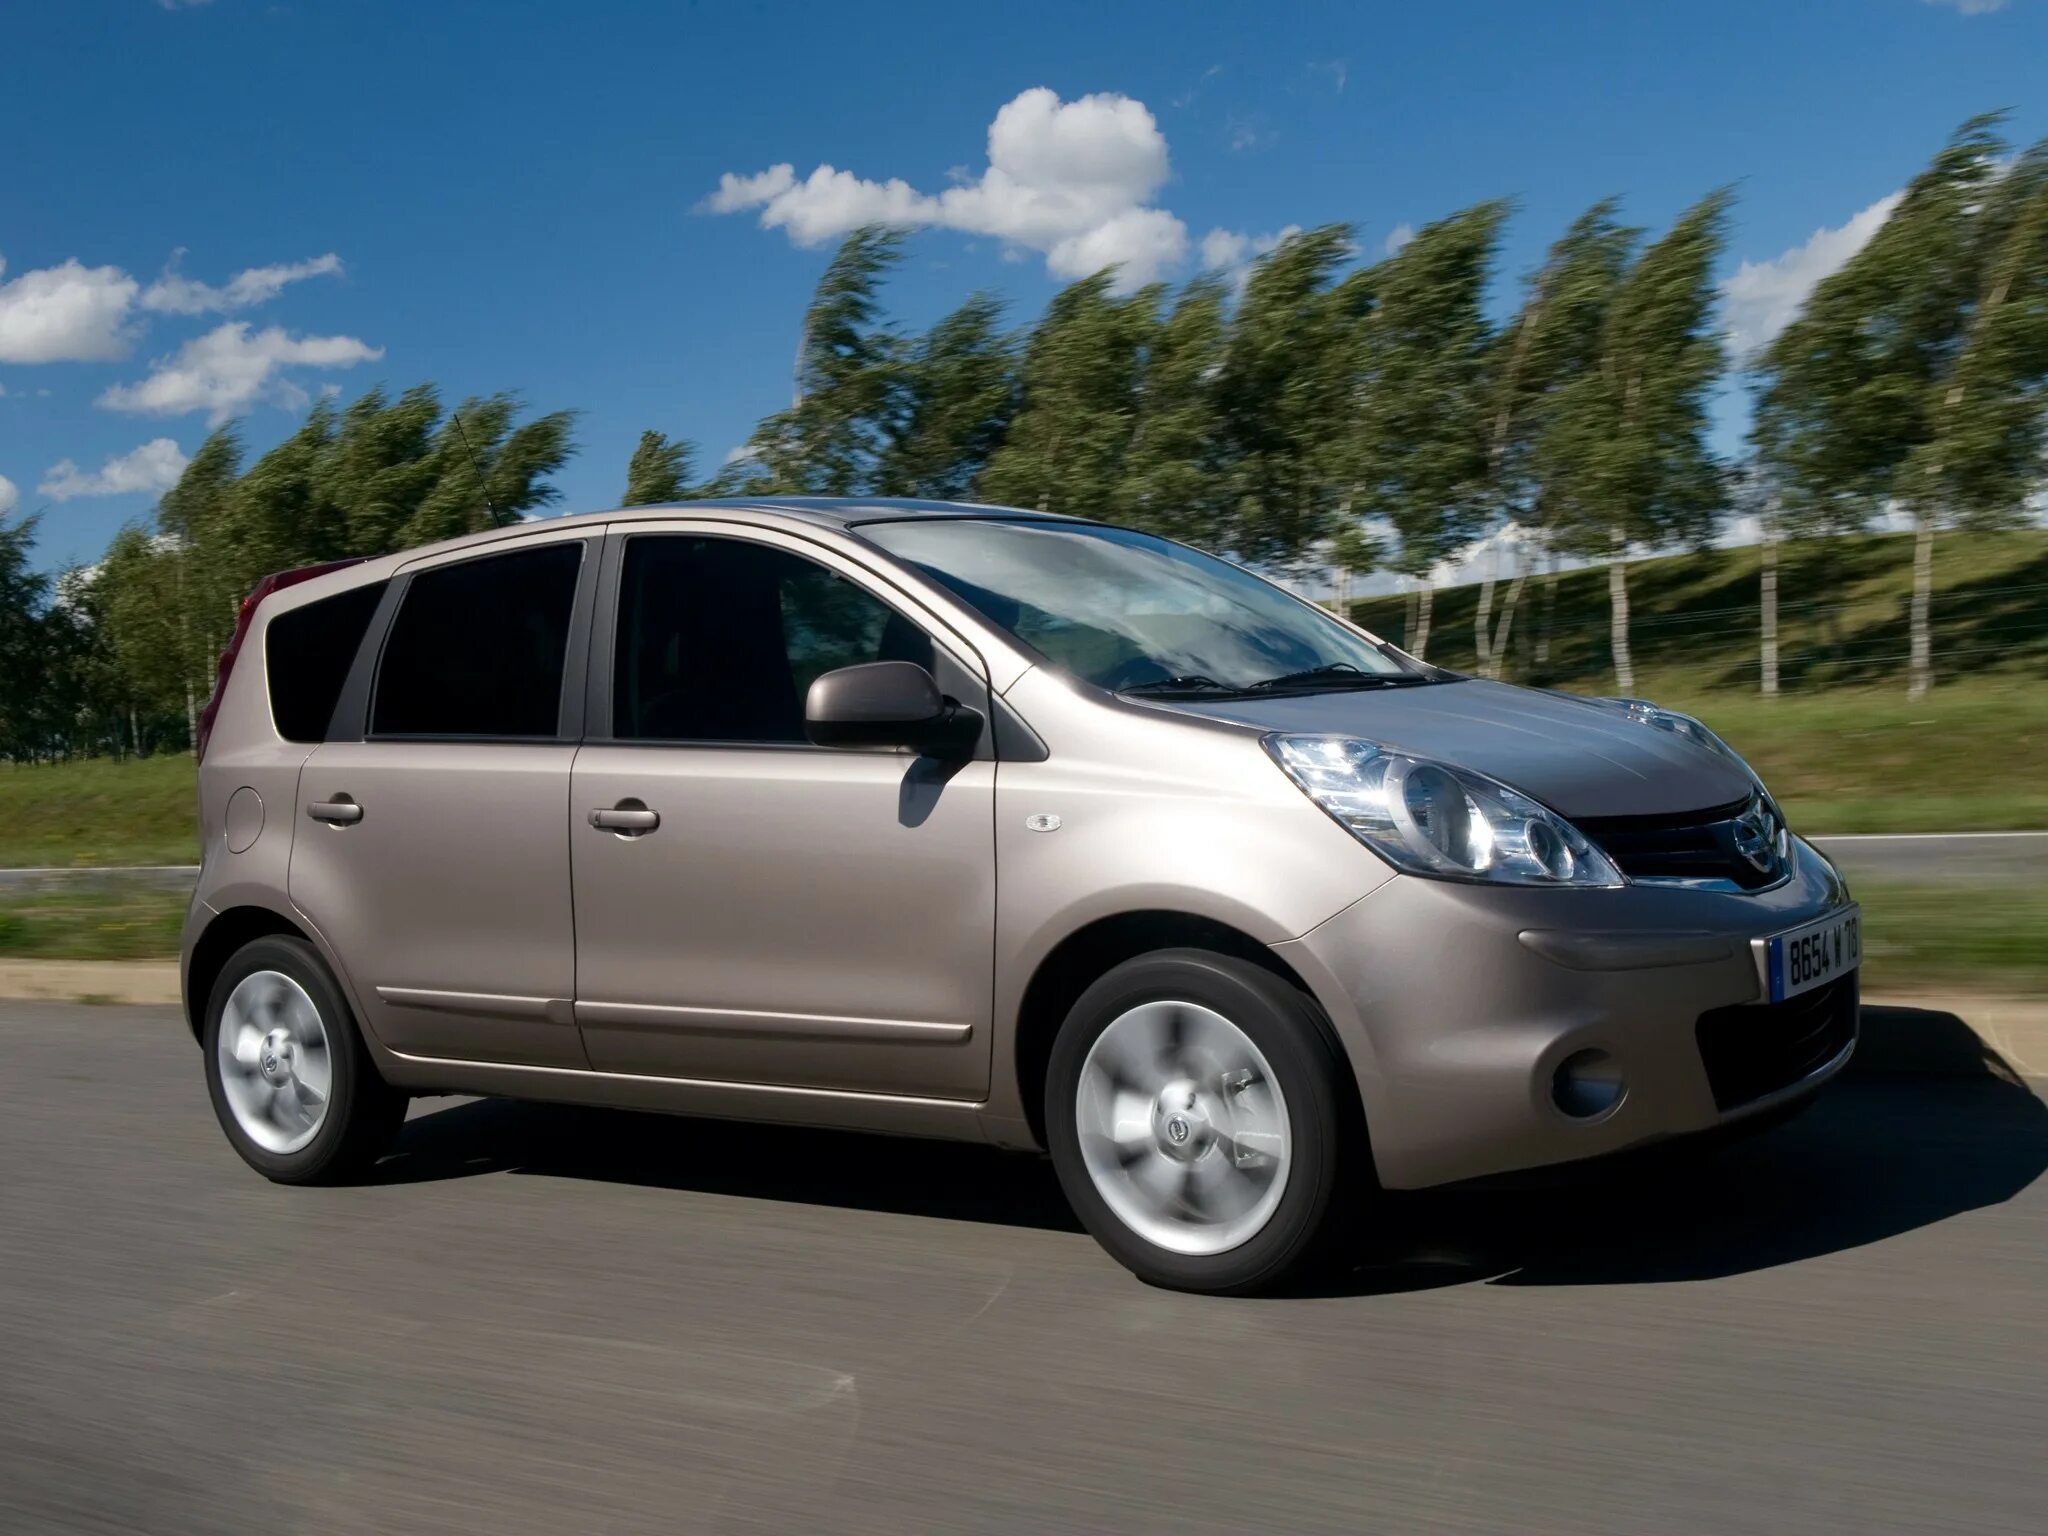 Nissan note e11. Nissan Note 2009. Ниссан ноут е11. Ниссан ноут 2003. Nissan Note 2014.